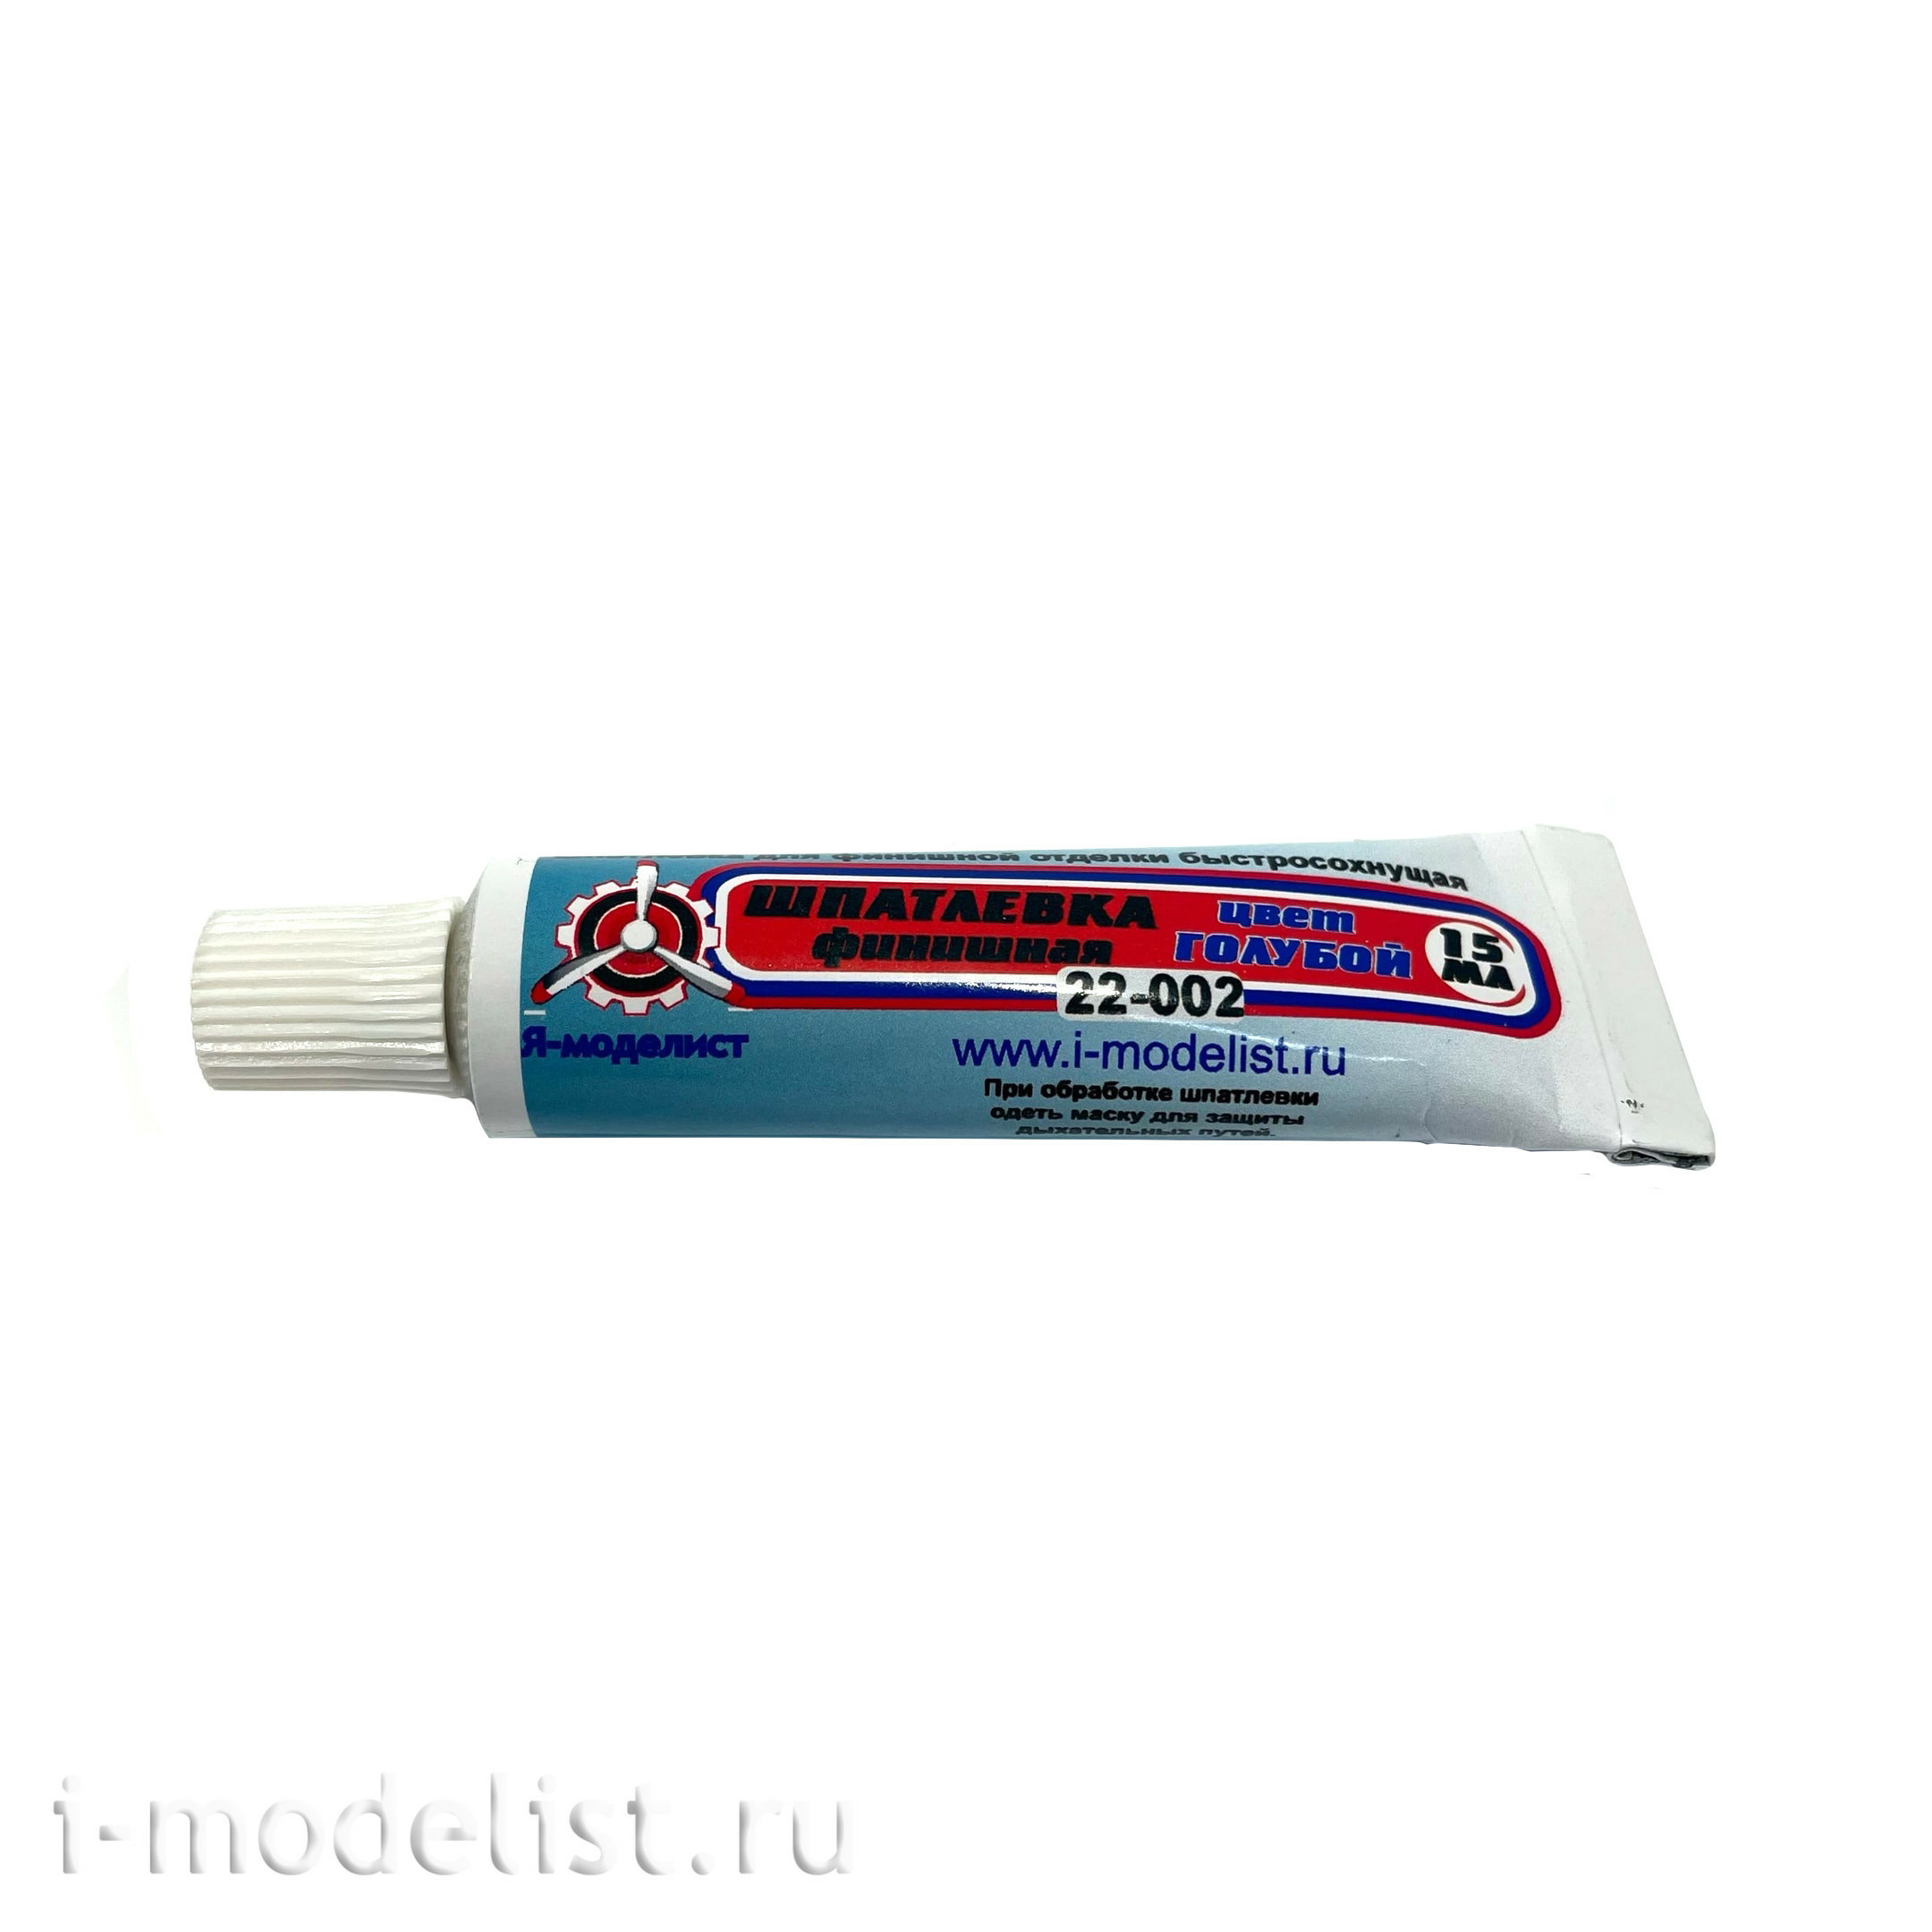 22-002 Imodelist Finishing putty, protective color, 15 ml